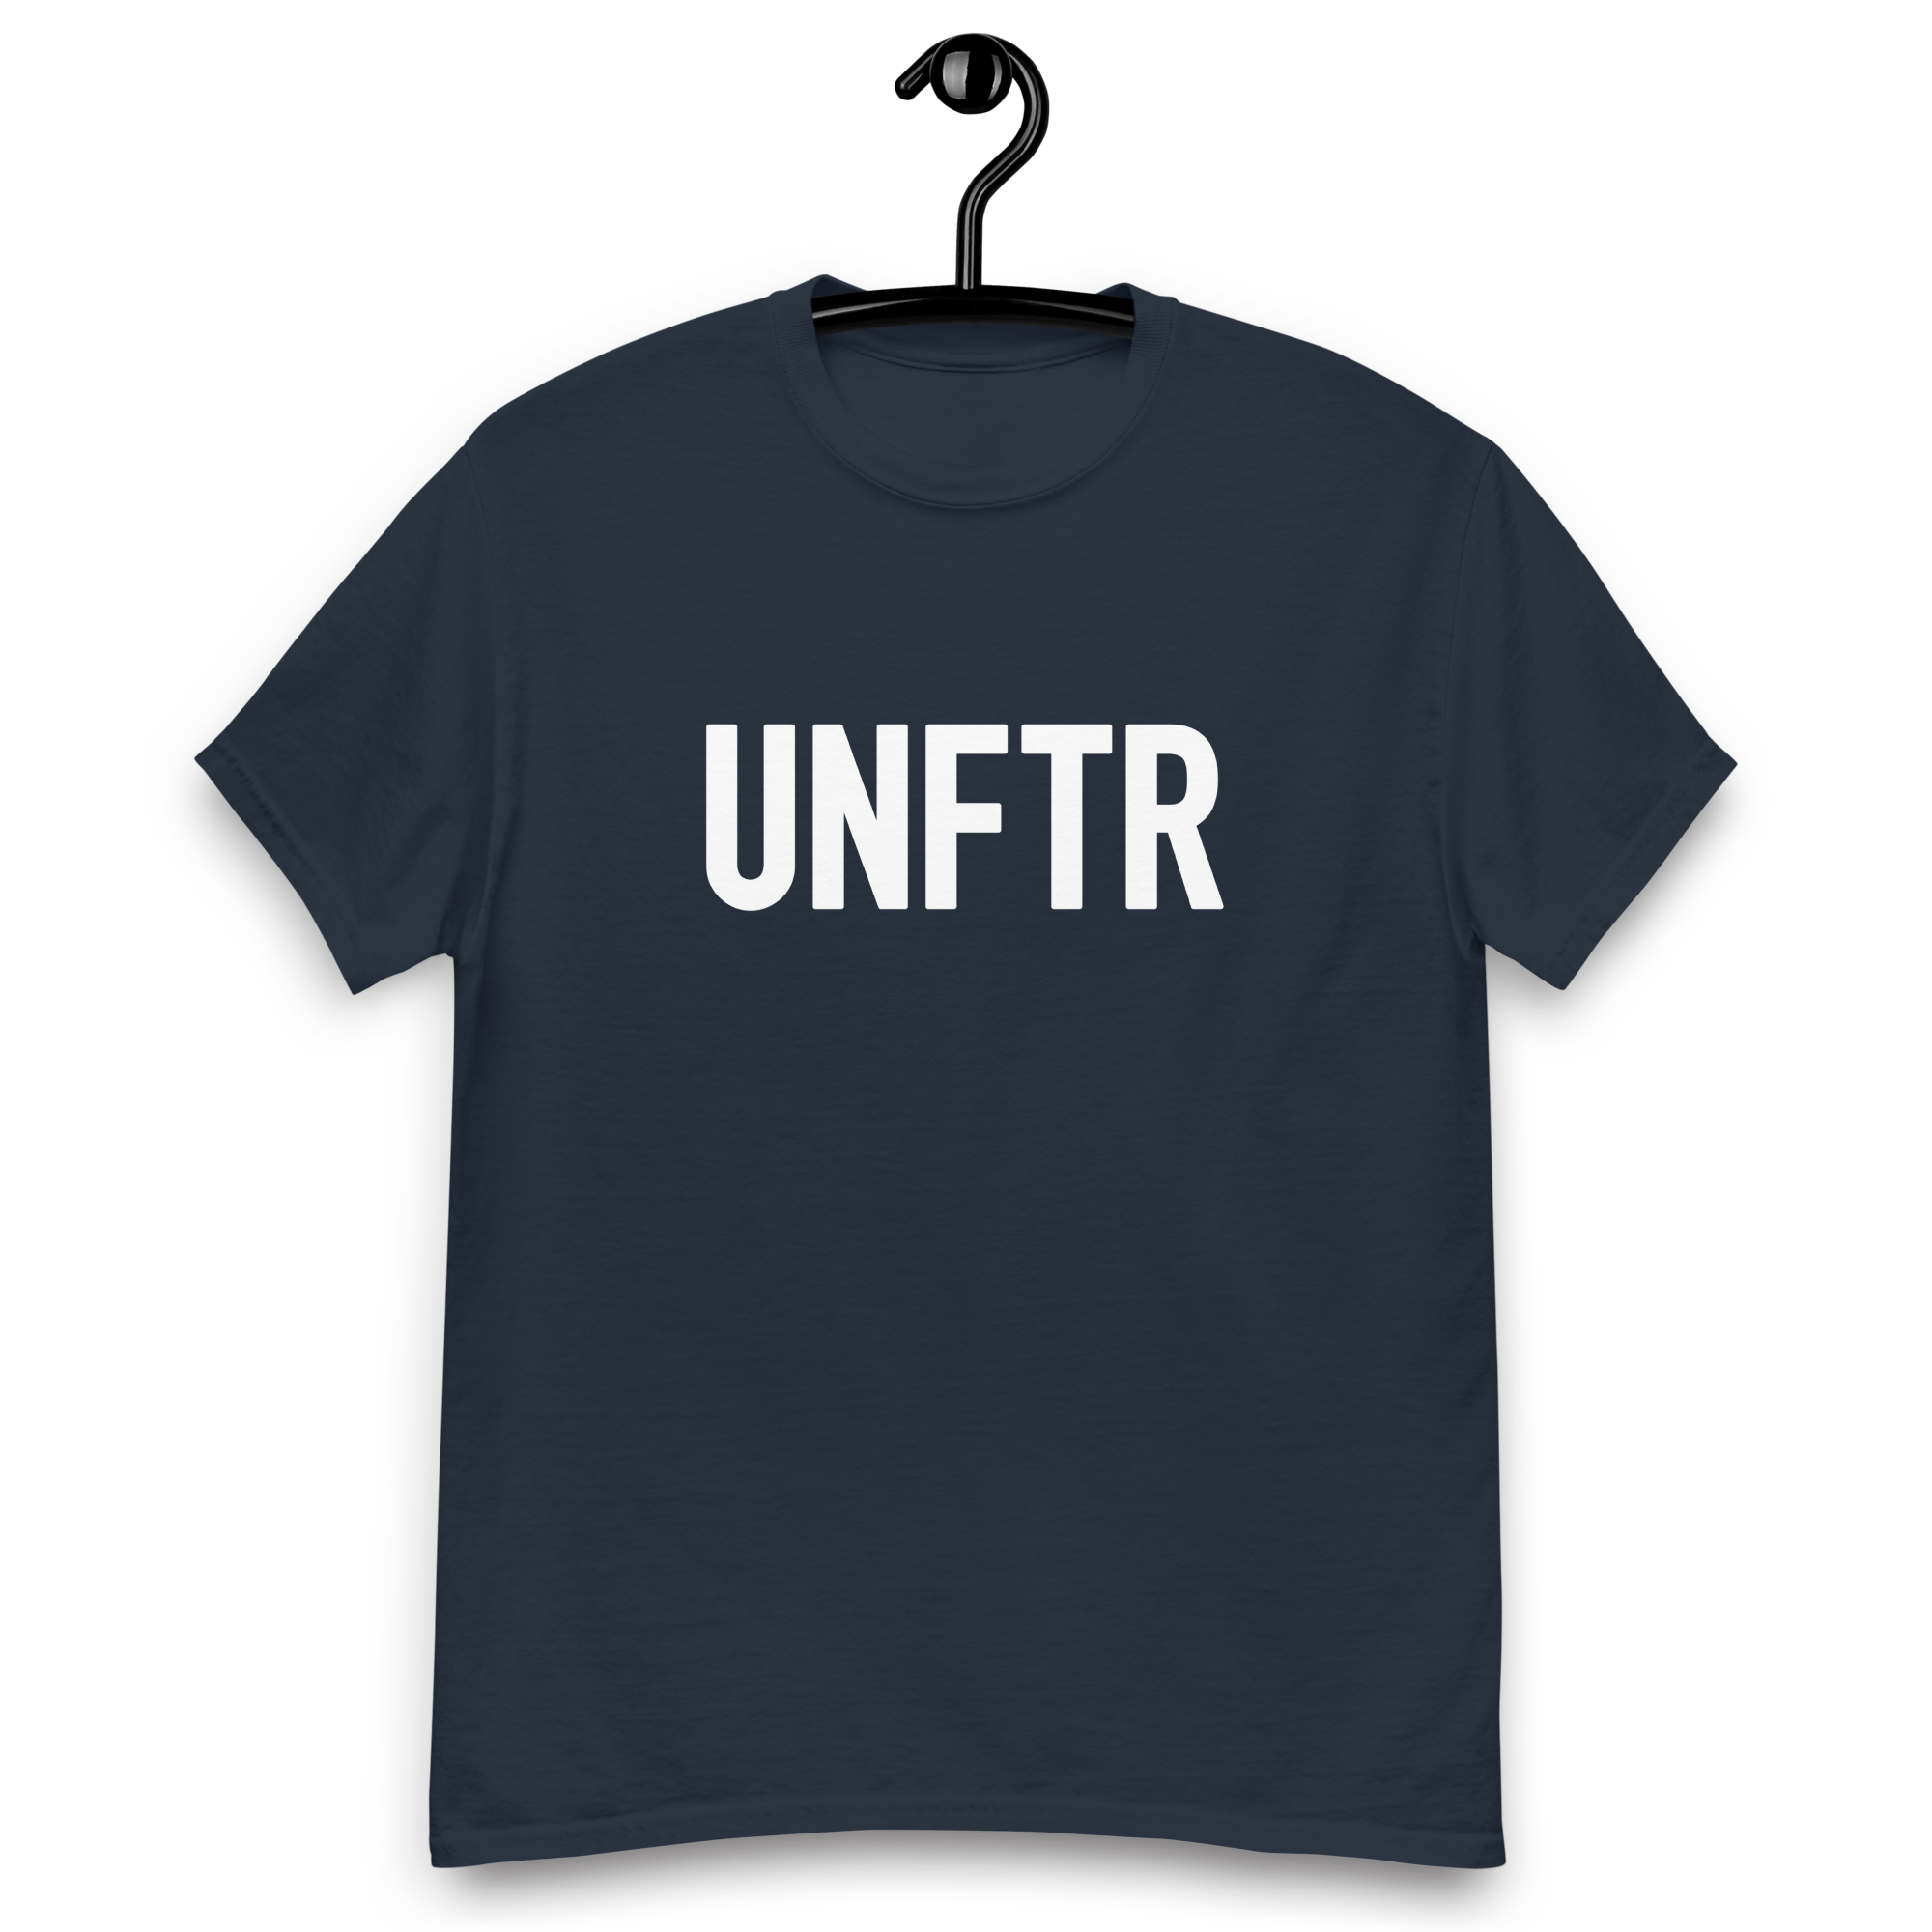 Navy tee shirt that says UNFTR in white on the front and F*ck Milton Friedman in white on the back